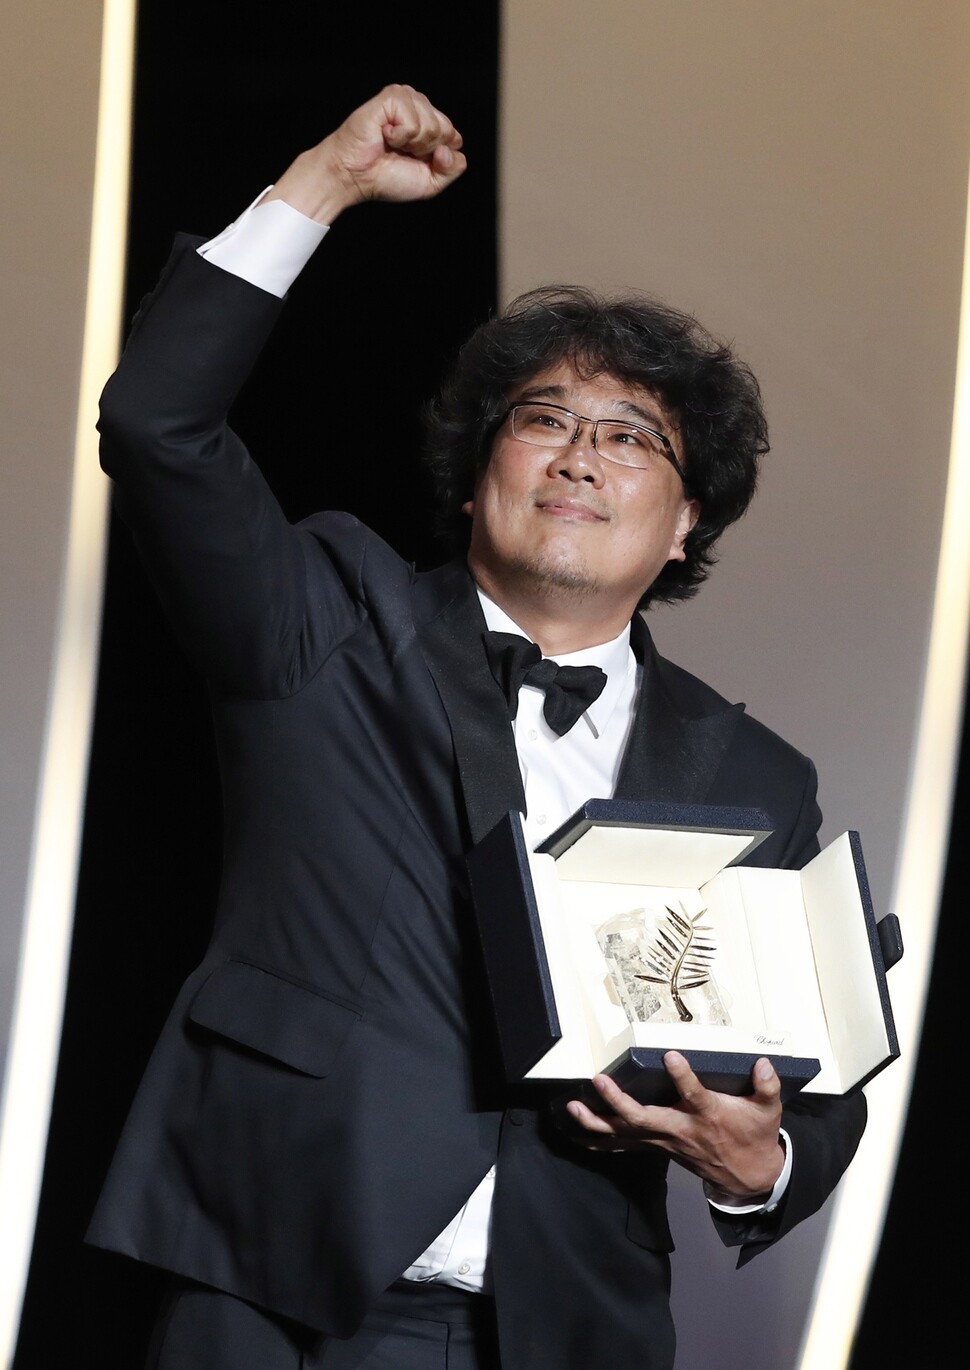 South Korean filmmaker Bong Joon-ho holds his Palme d’Or prize at the Cannes Film Festival on May 25. (EPA/Yonhap News)